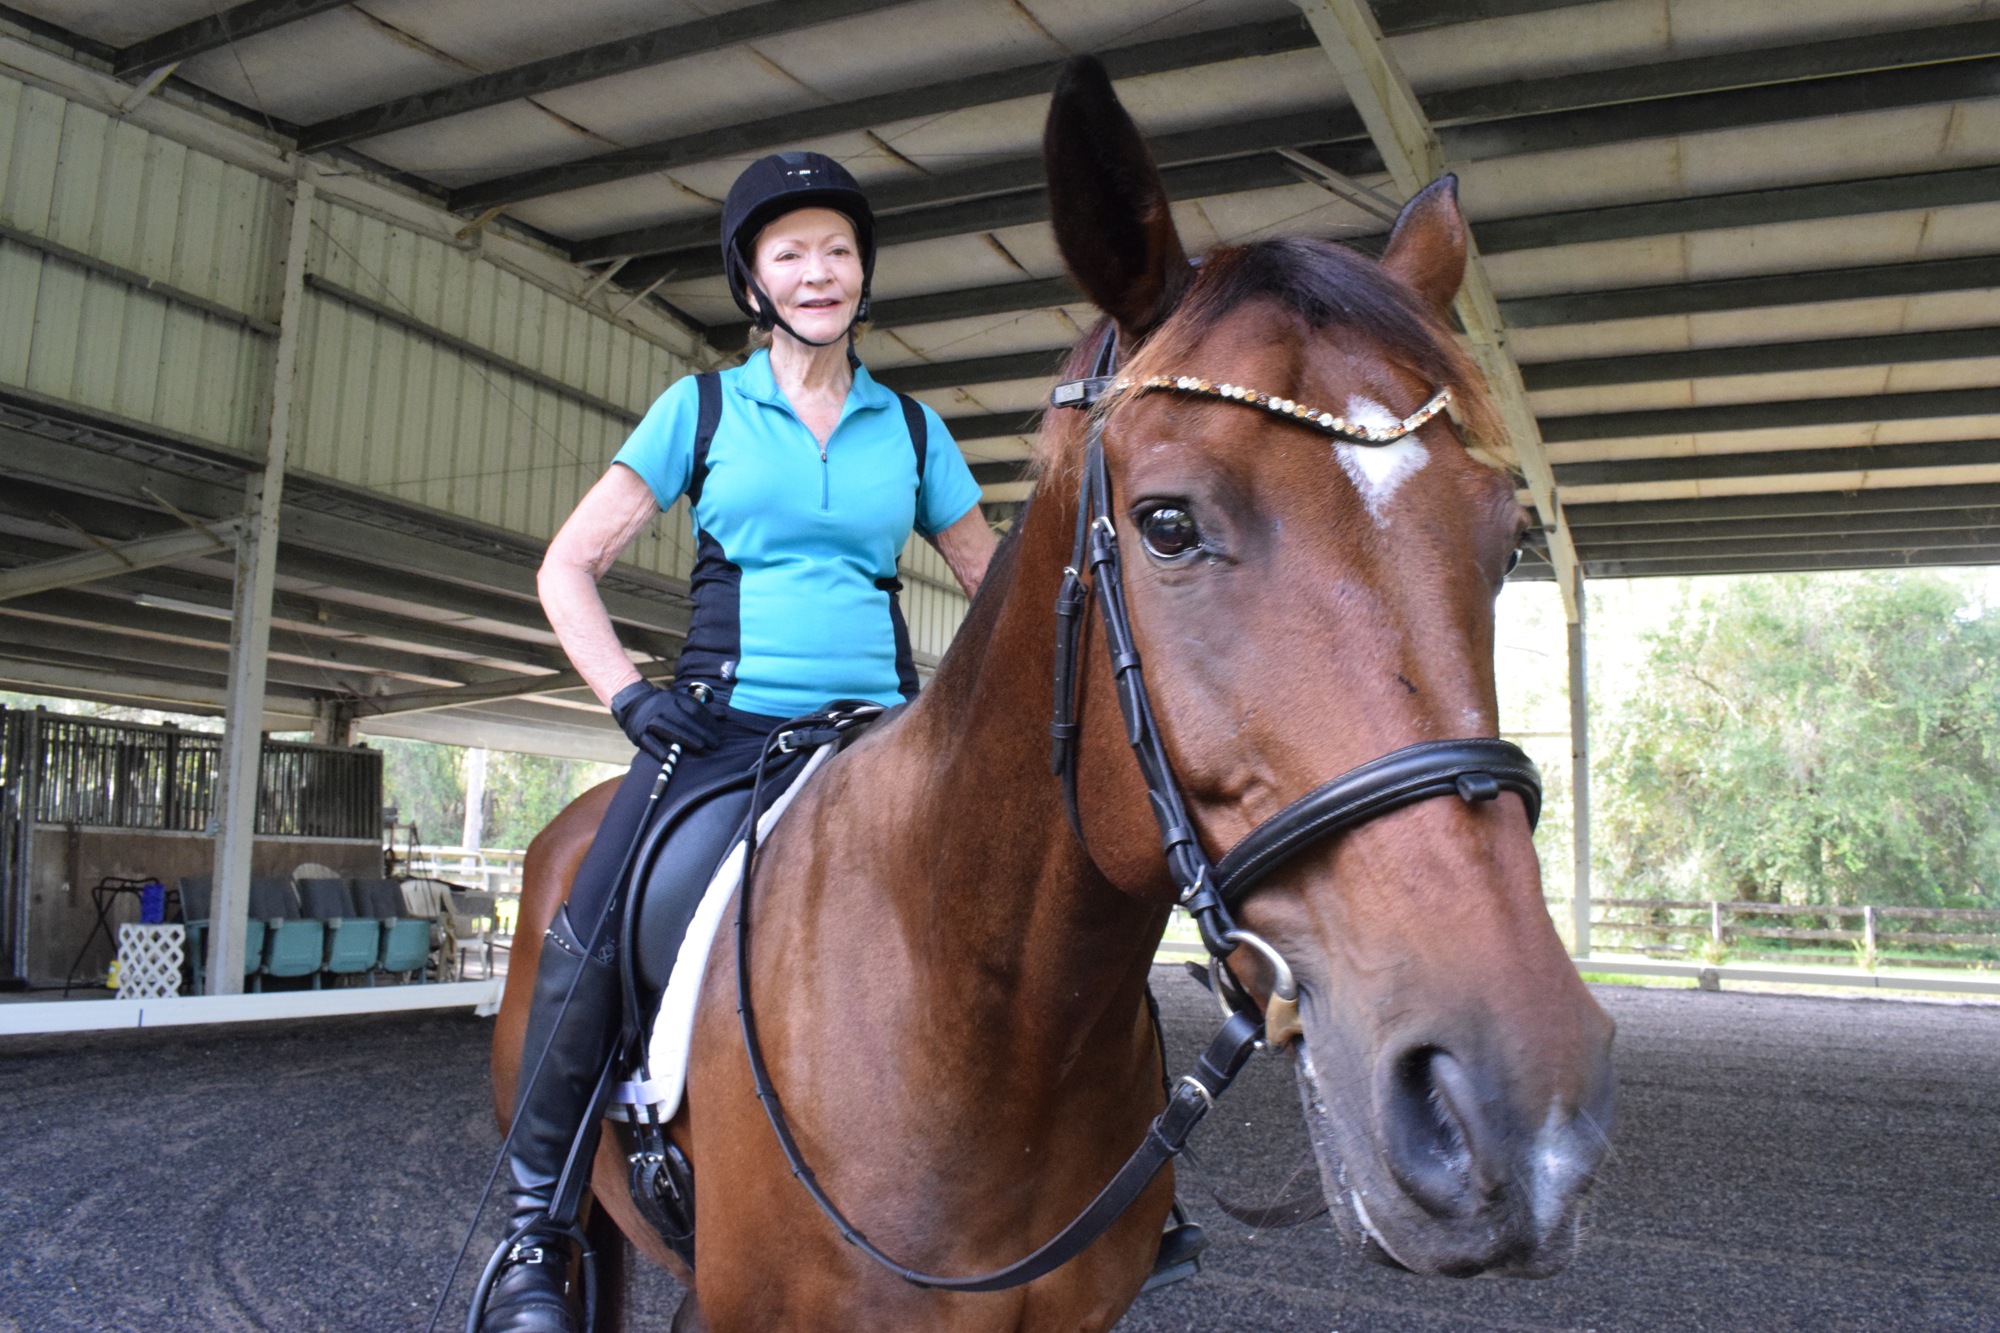 University Place's Claudia Pennington rides horses four to five times per week. She does pilates to stay fit, so riding is easier.